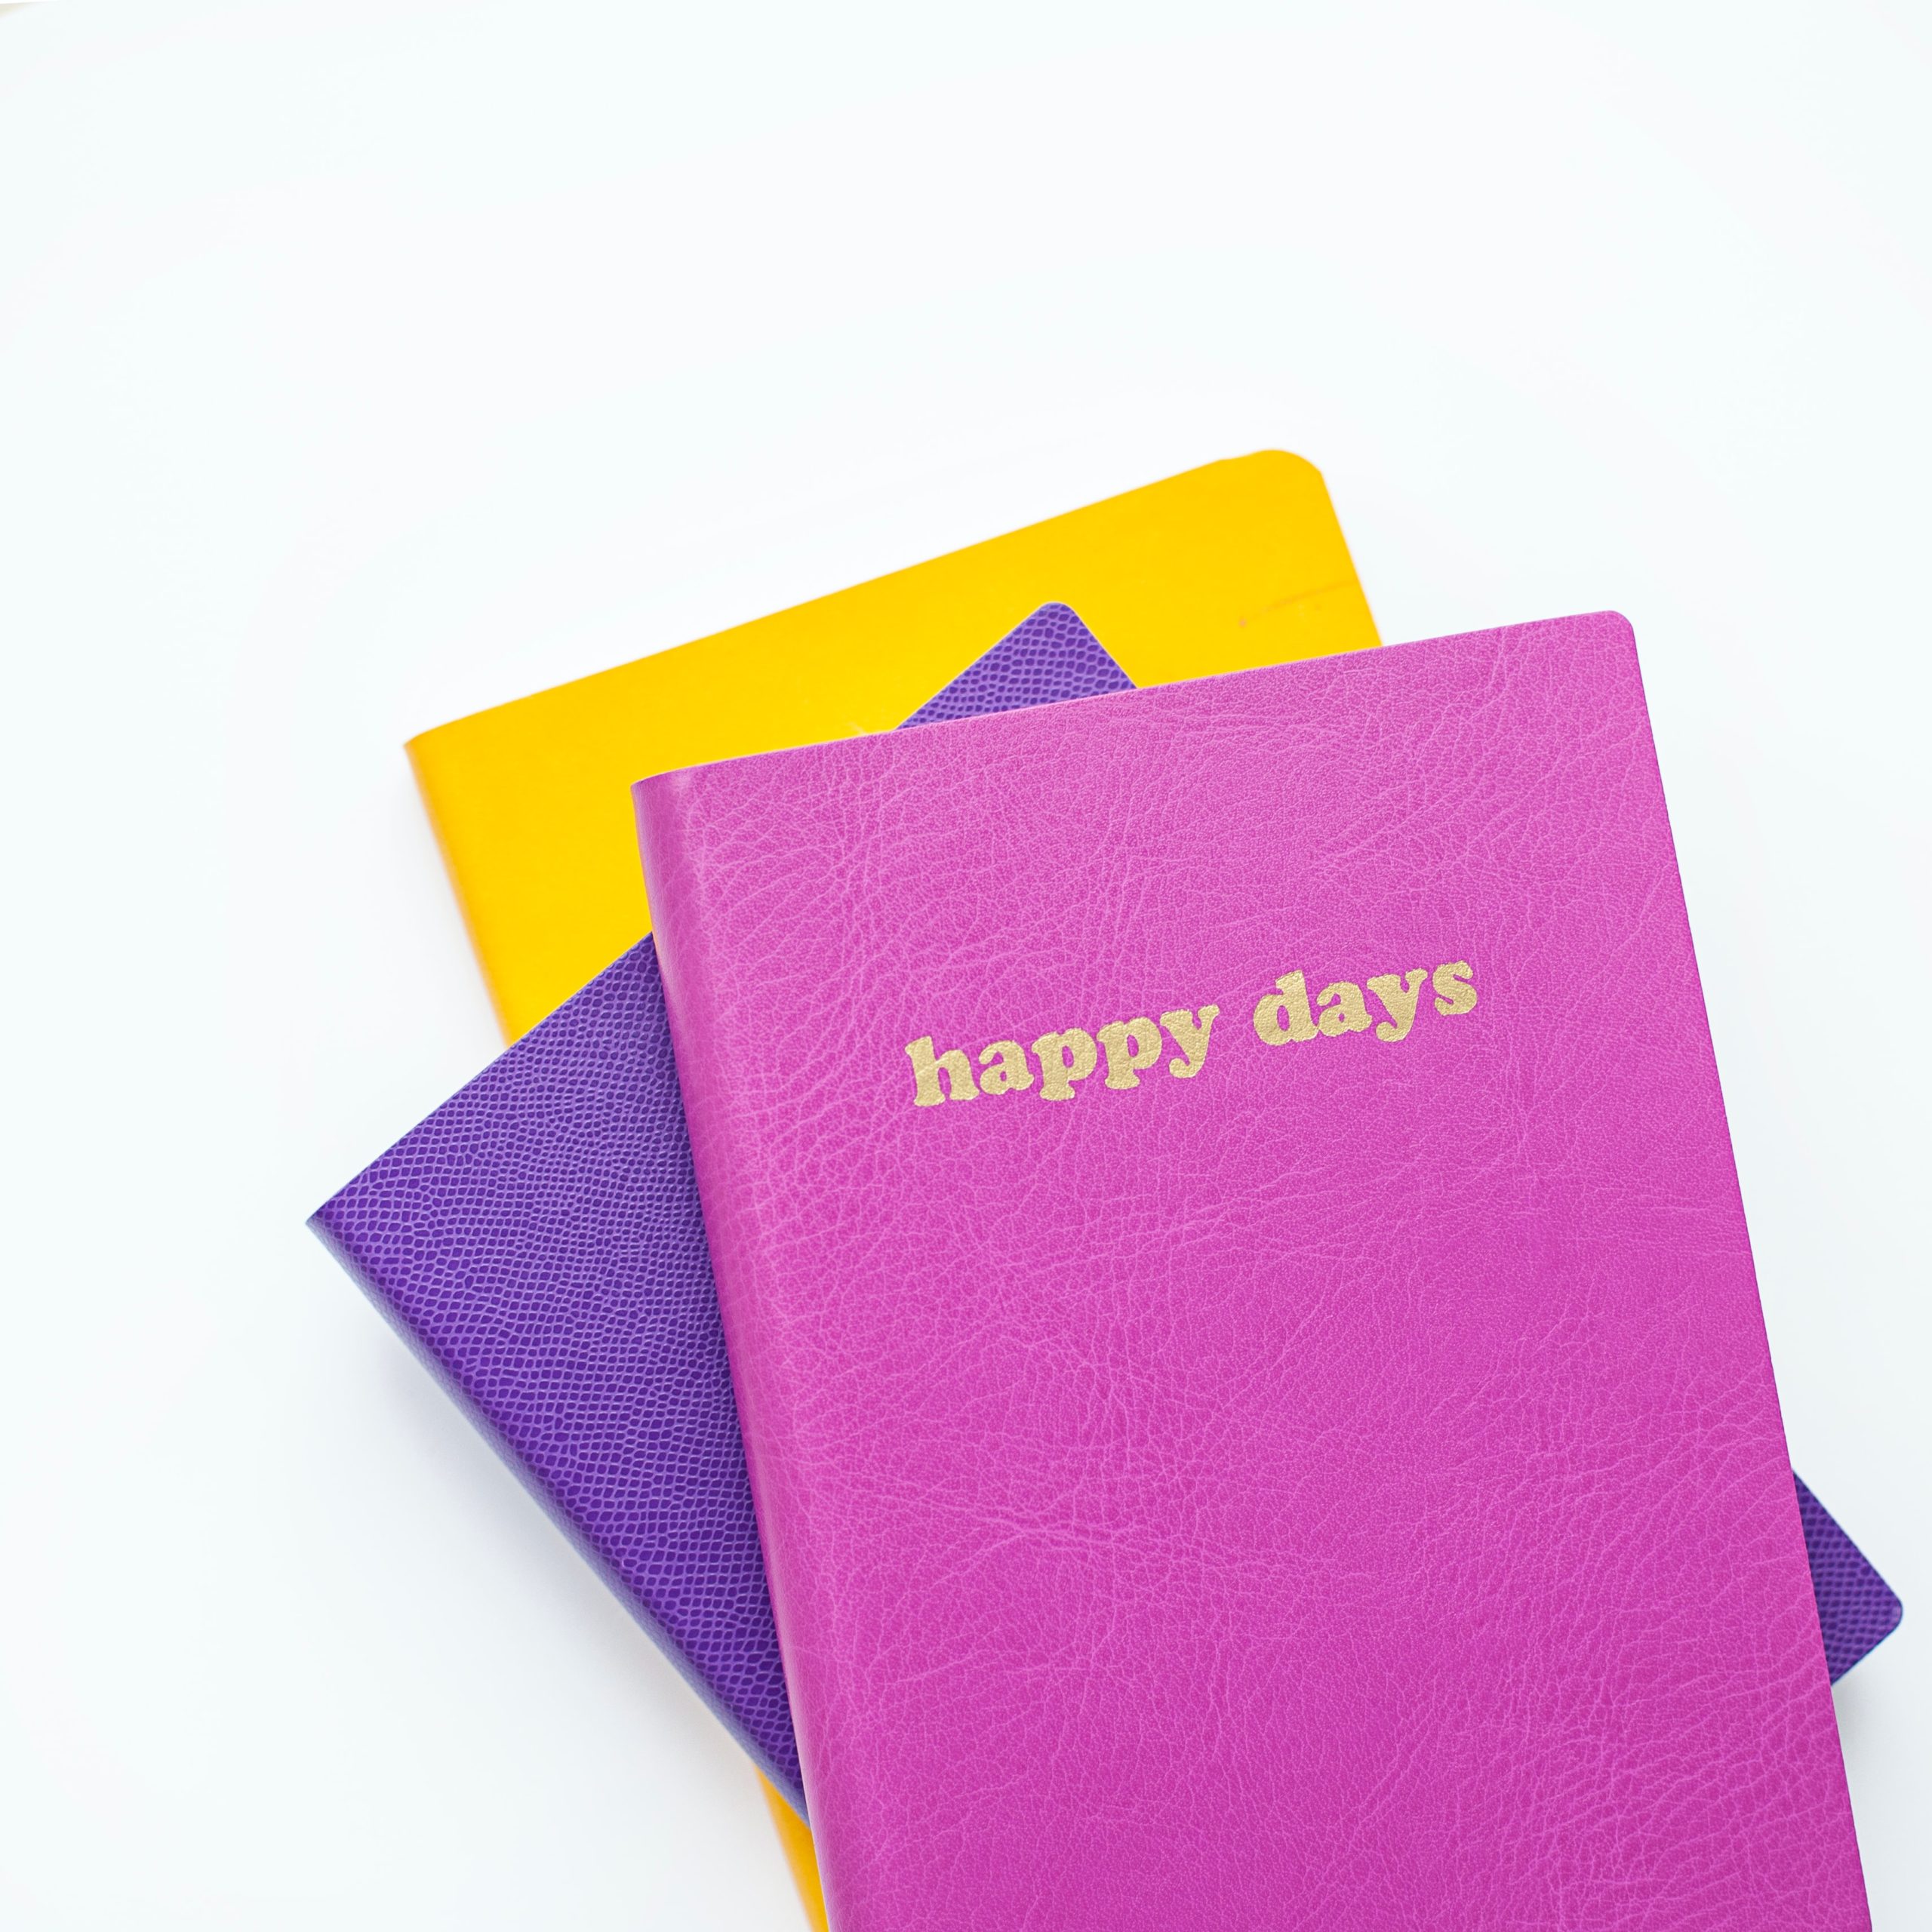 Journal that says "happy days" on the cover